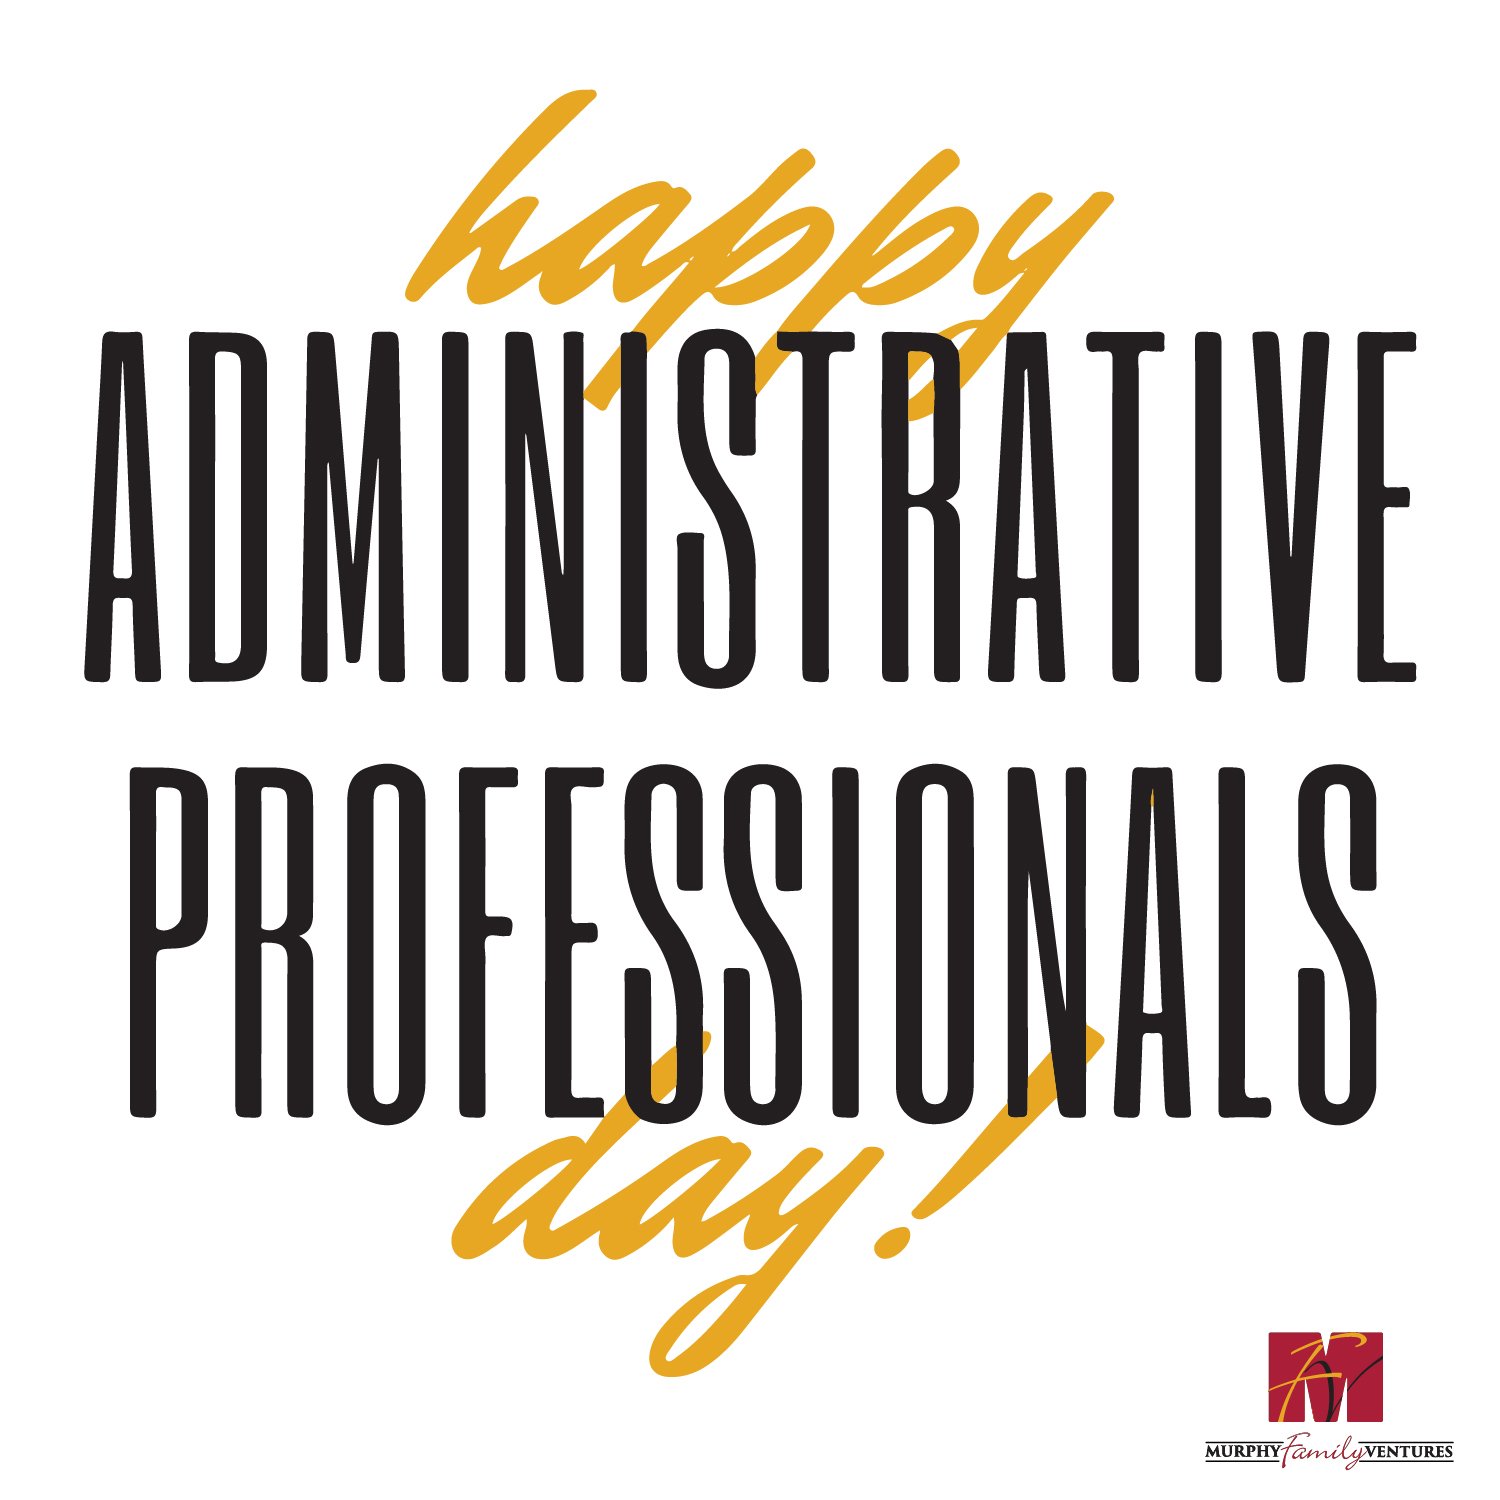 We appreciate you not only today, but every day! Thank you for playing an important role in keeping our businesses running smoothly!